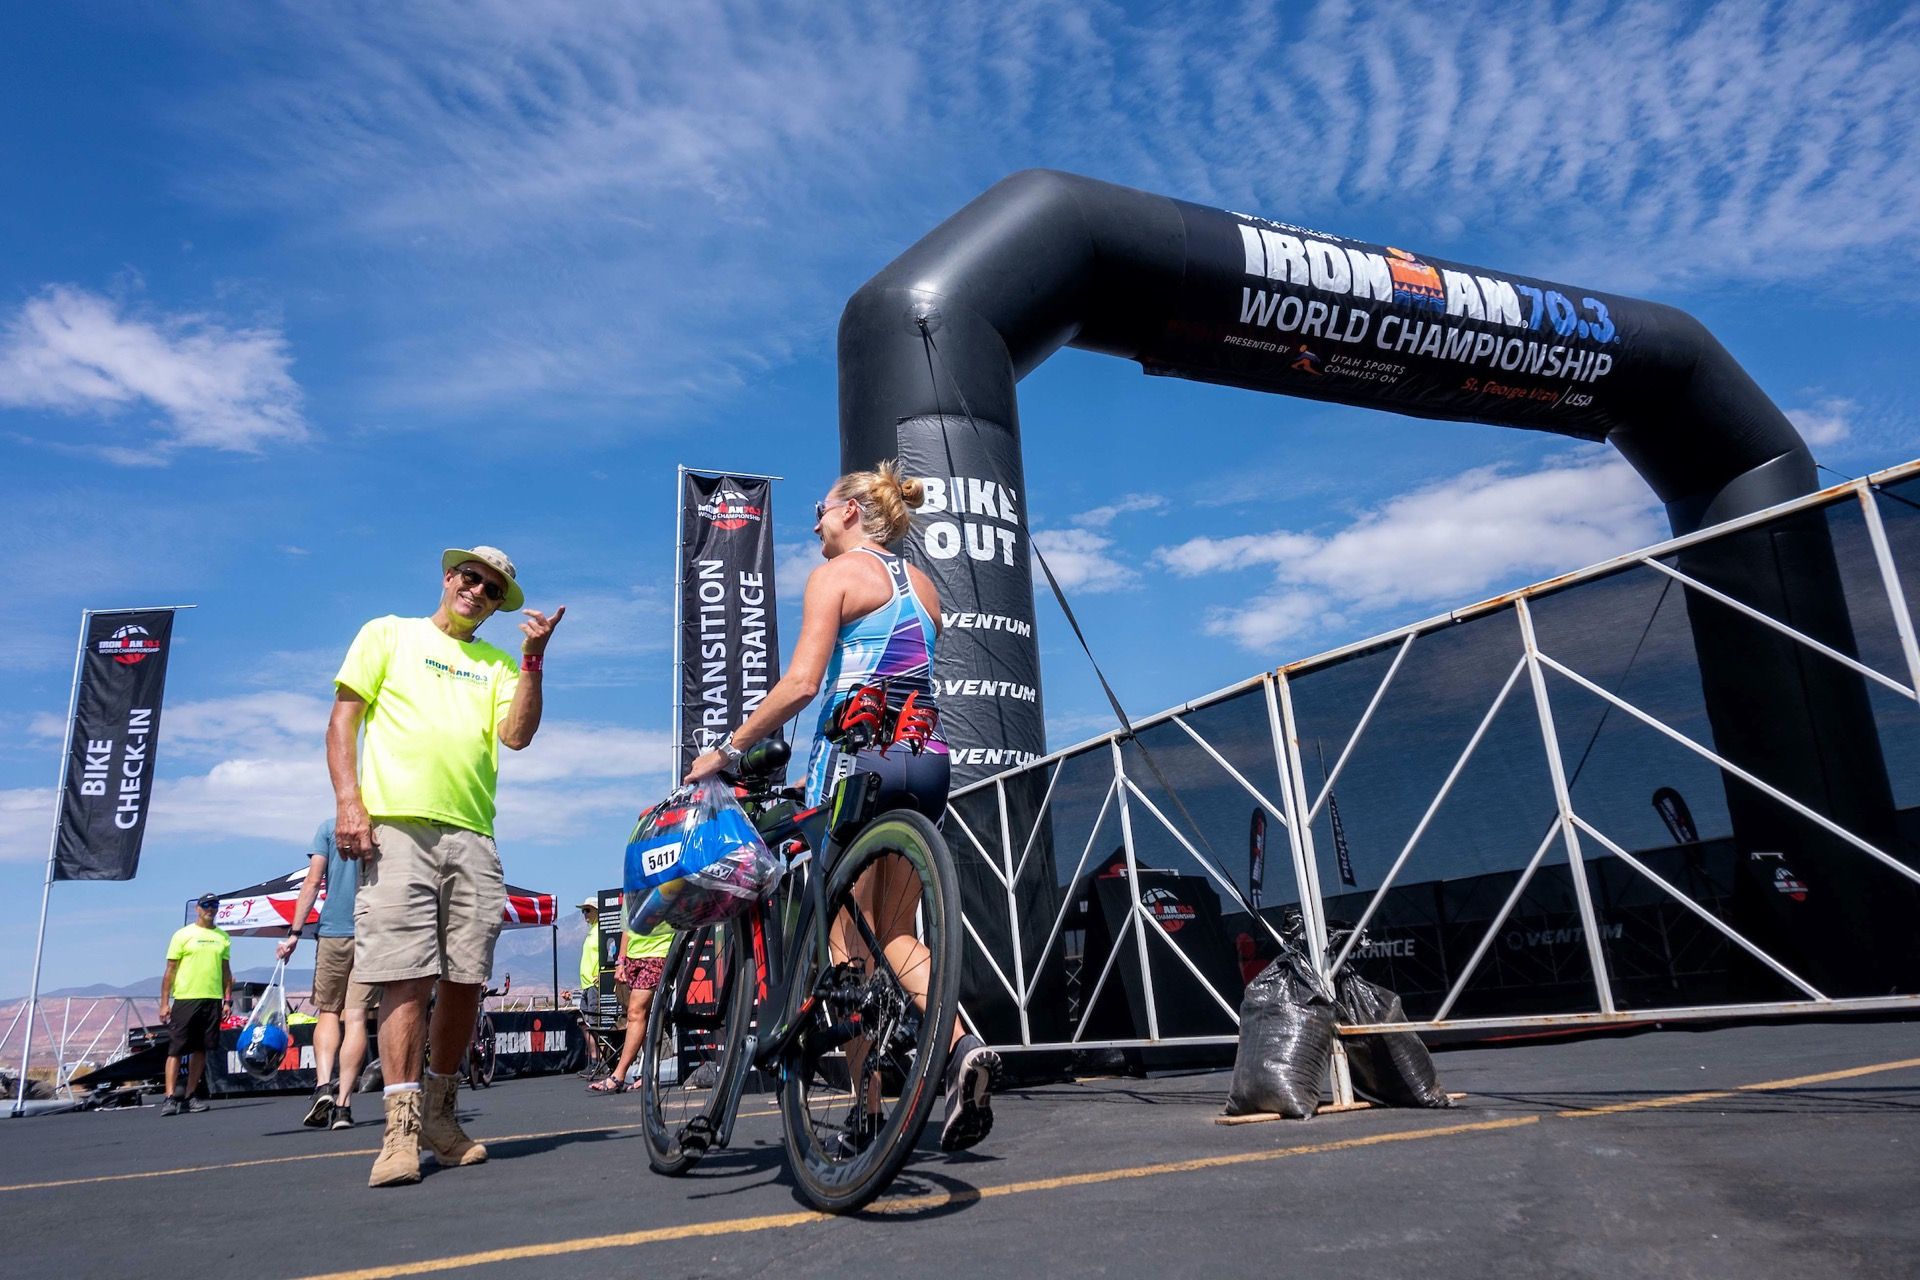 The final preparations have now been completed and athletes have headed to bed ahead of the 2021 Ironman 70.3 World Championship. We take a look back at Friday's action in St. George ahead of the big race.